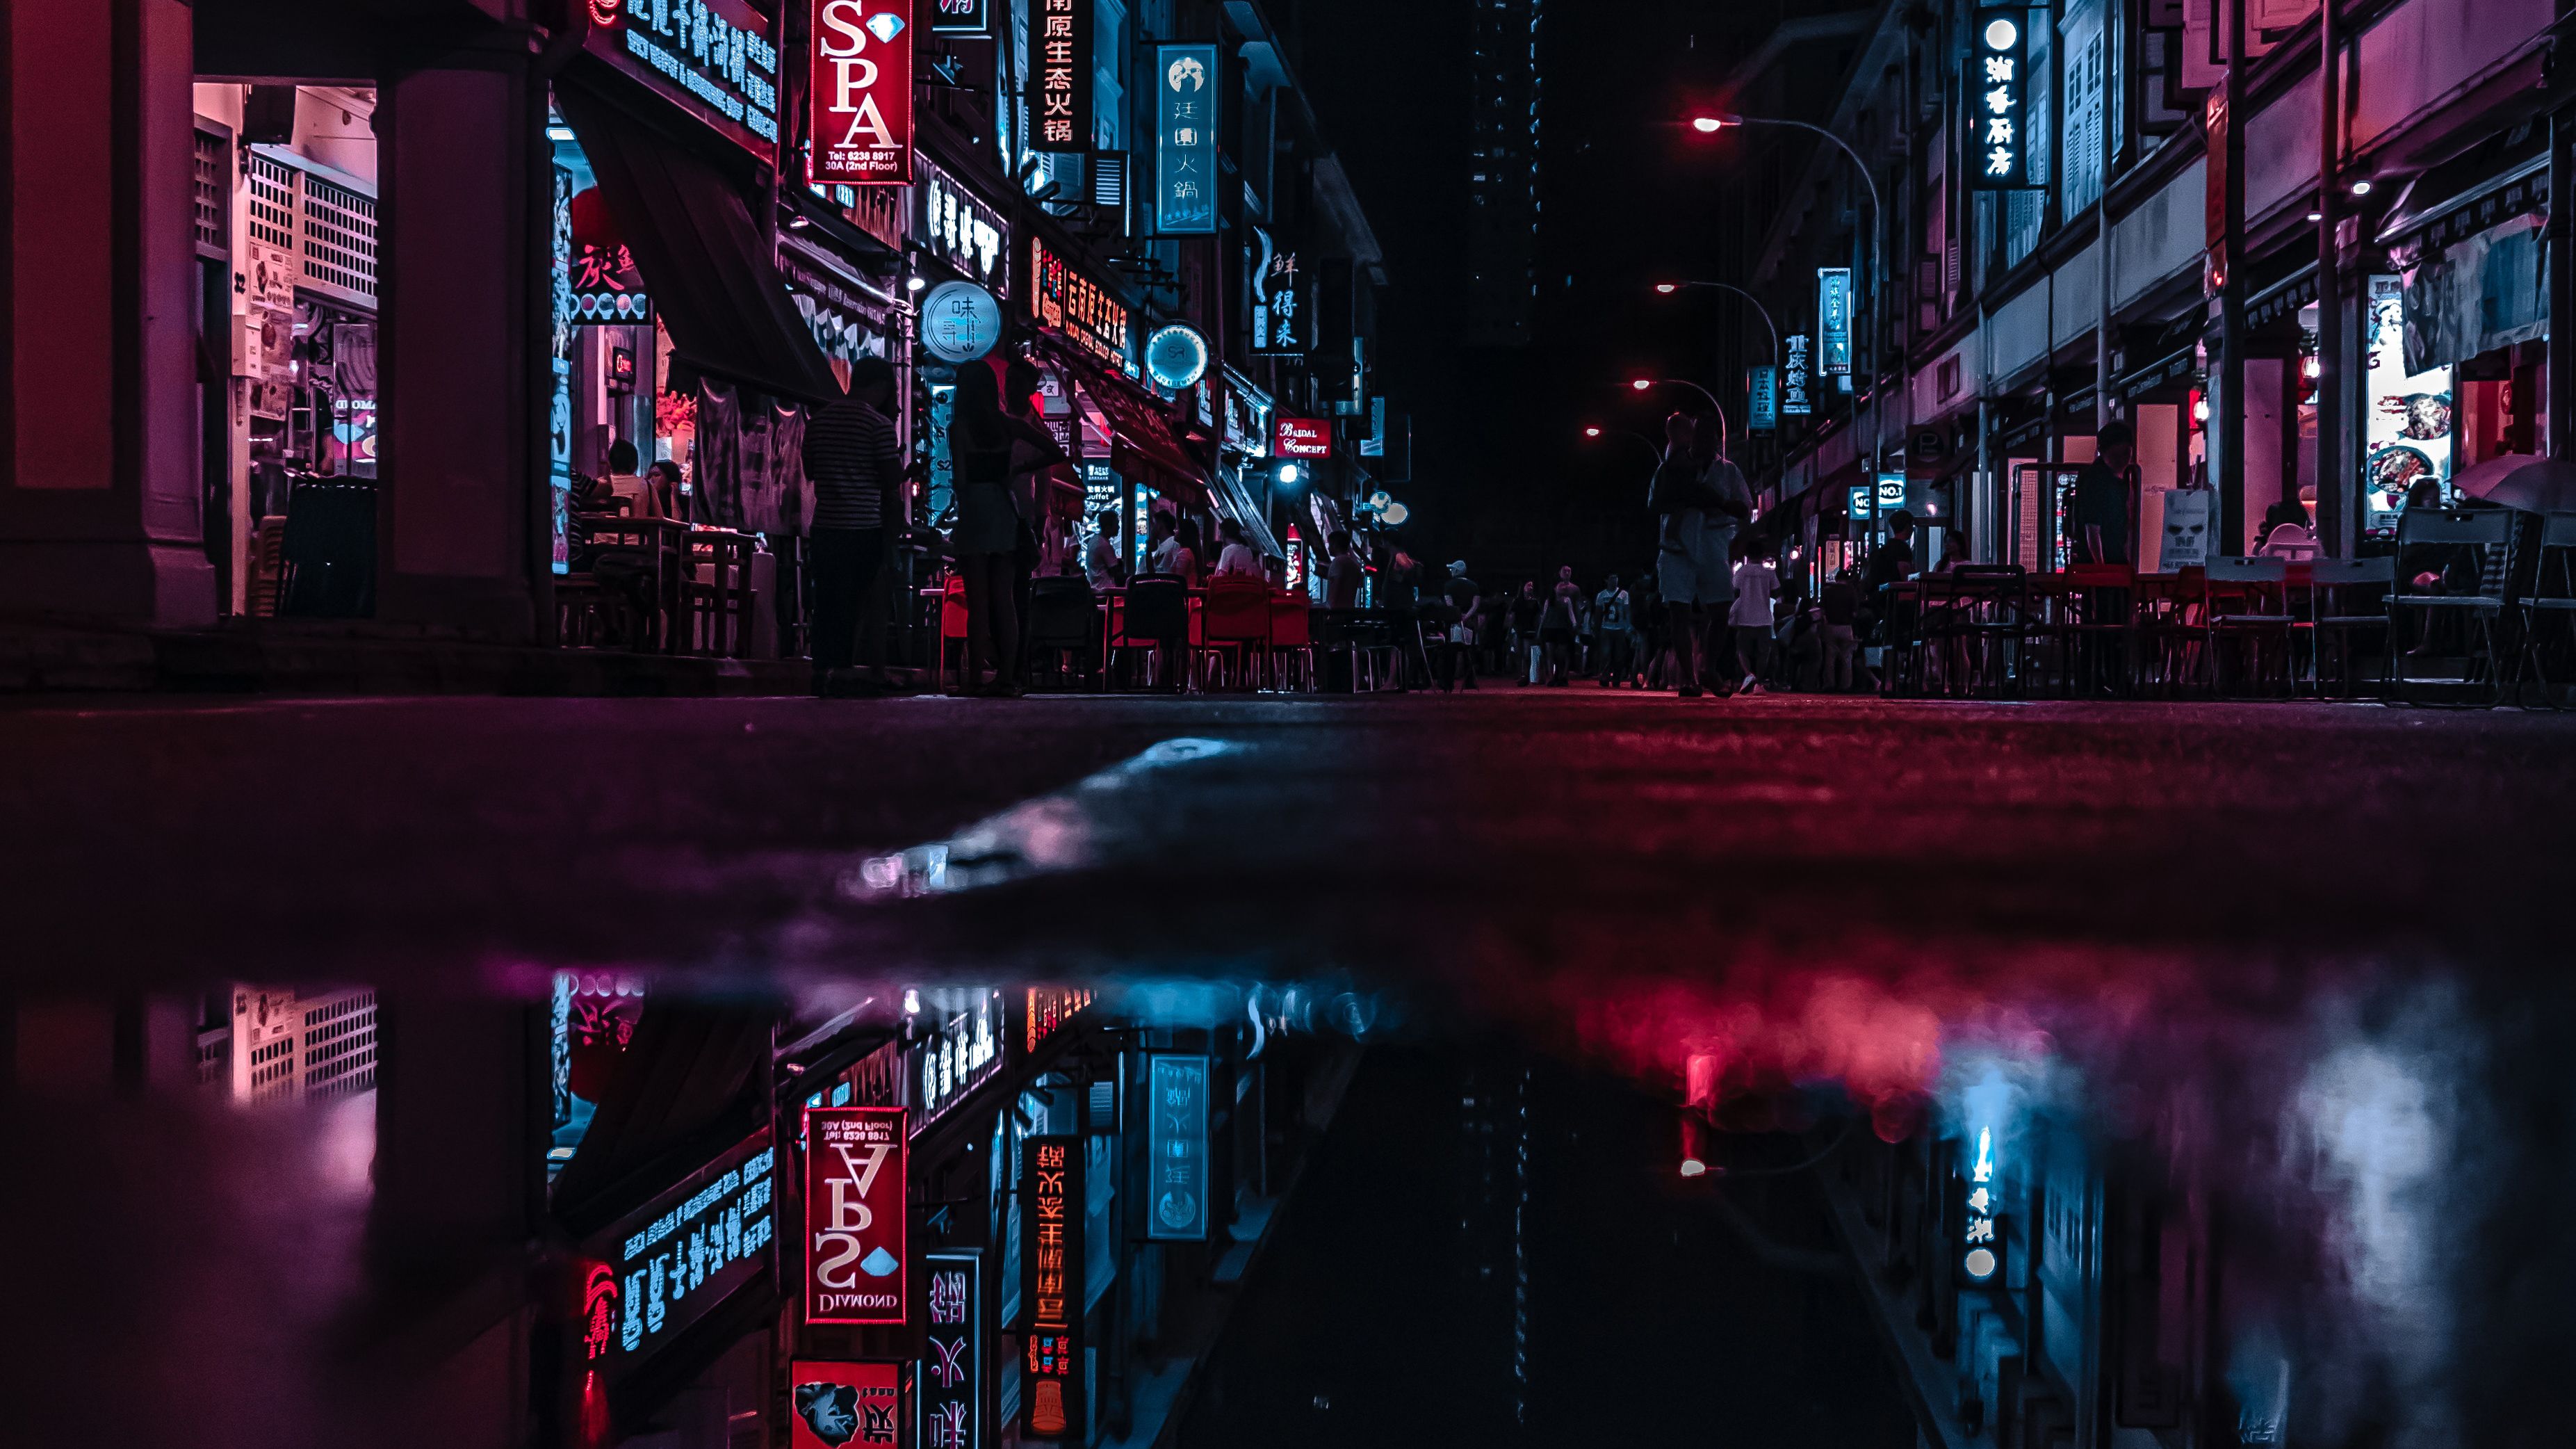 A city street at night with neon lights - City